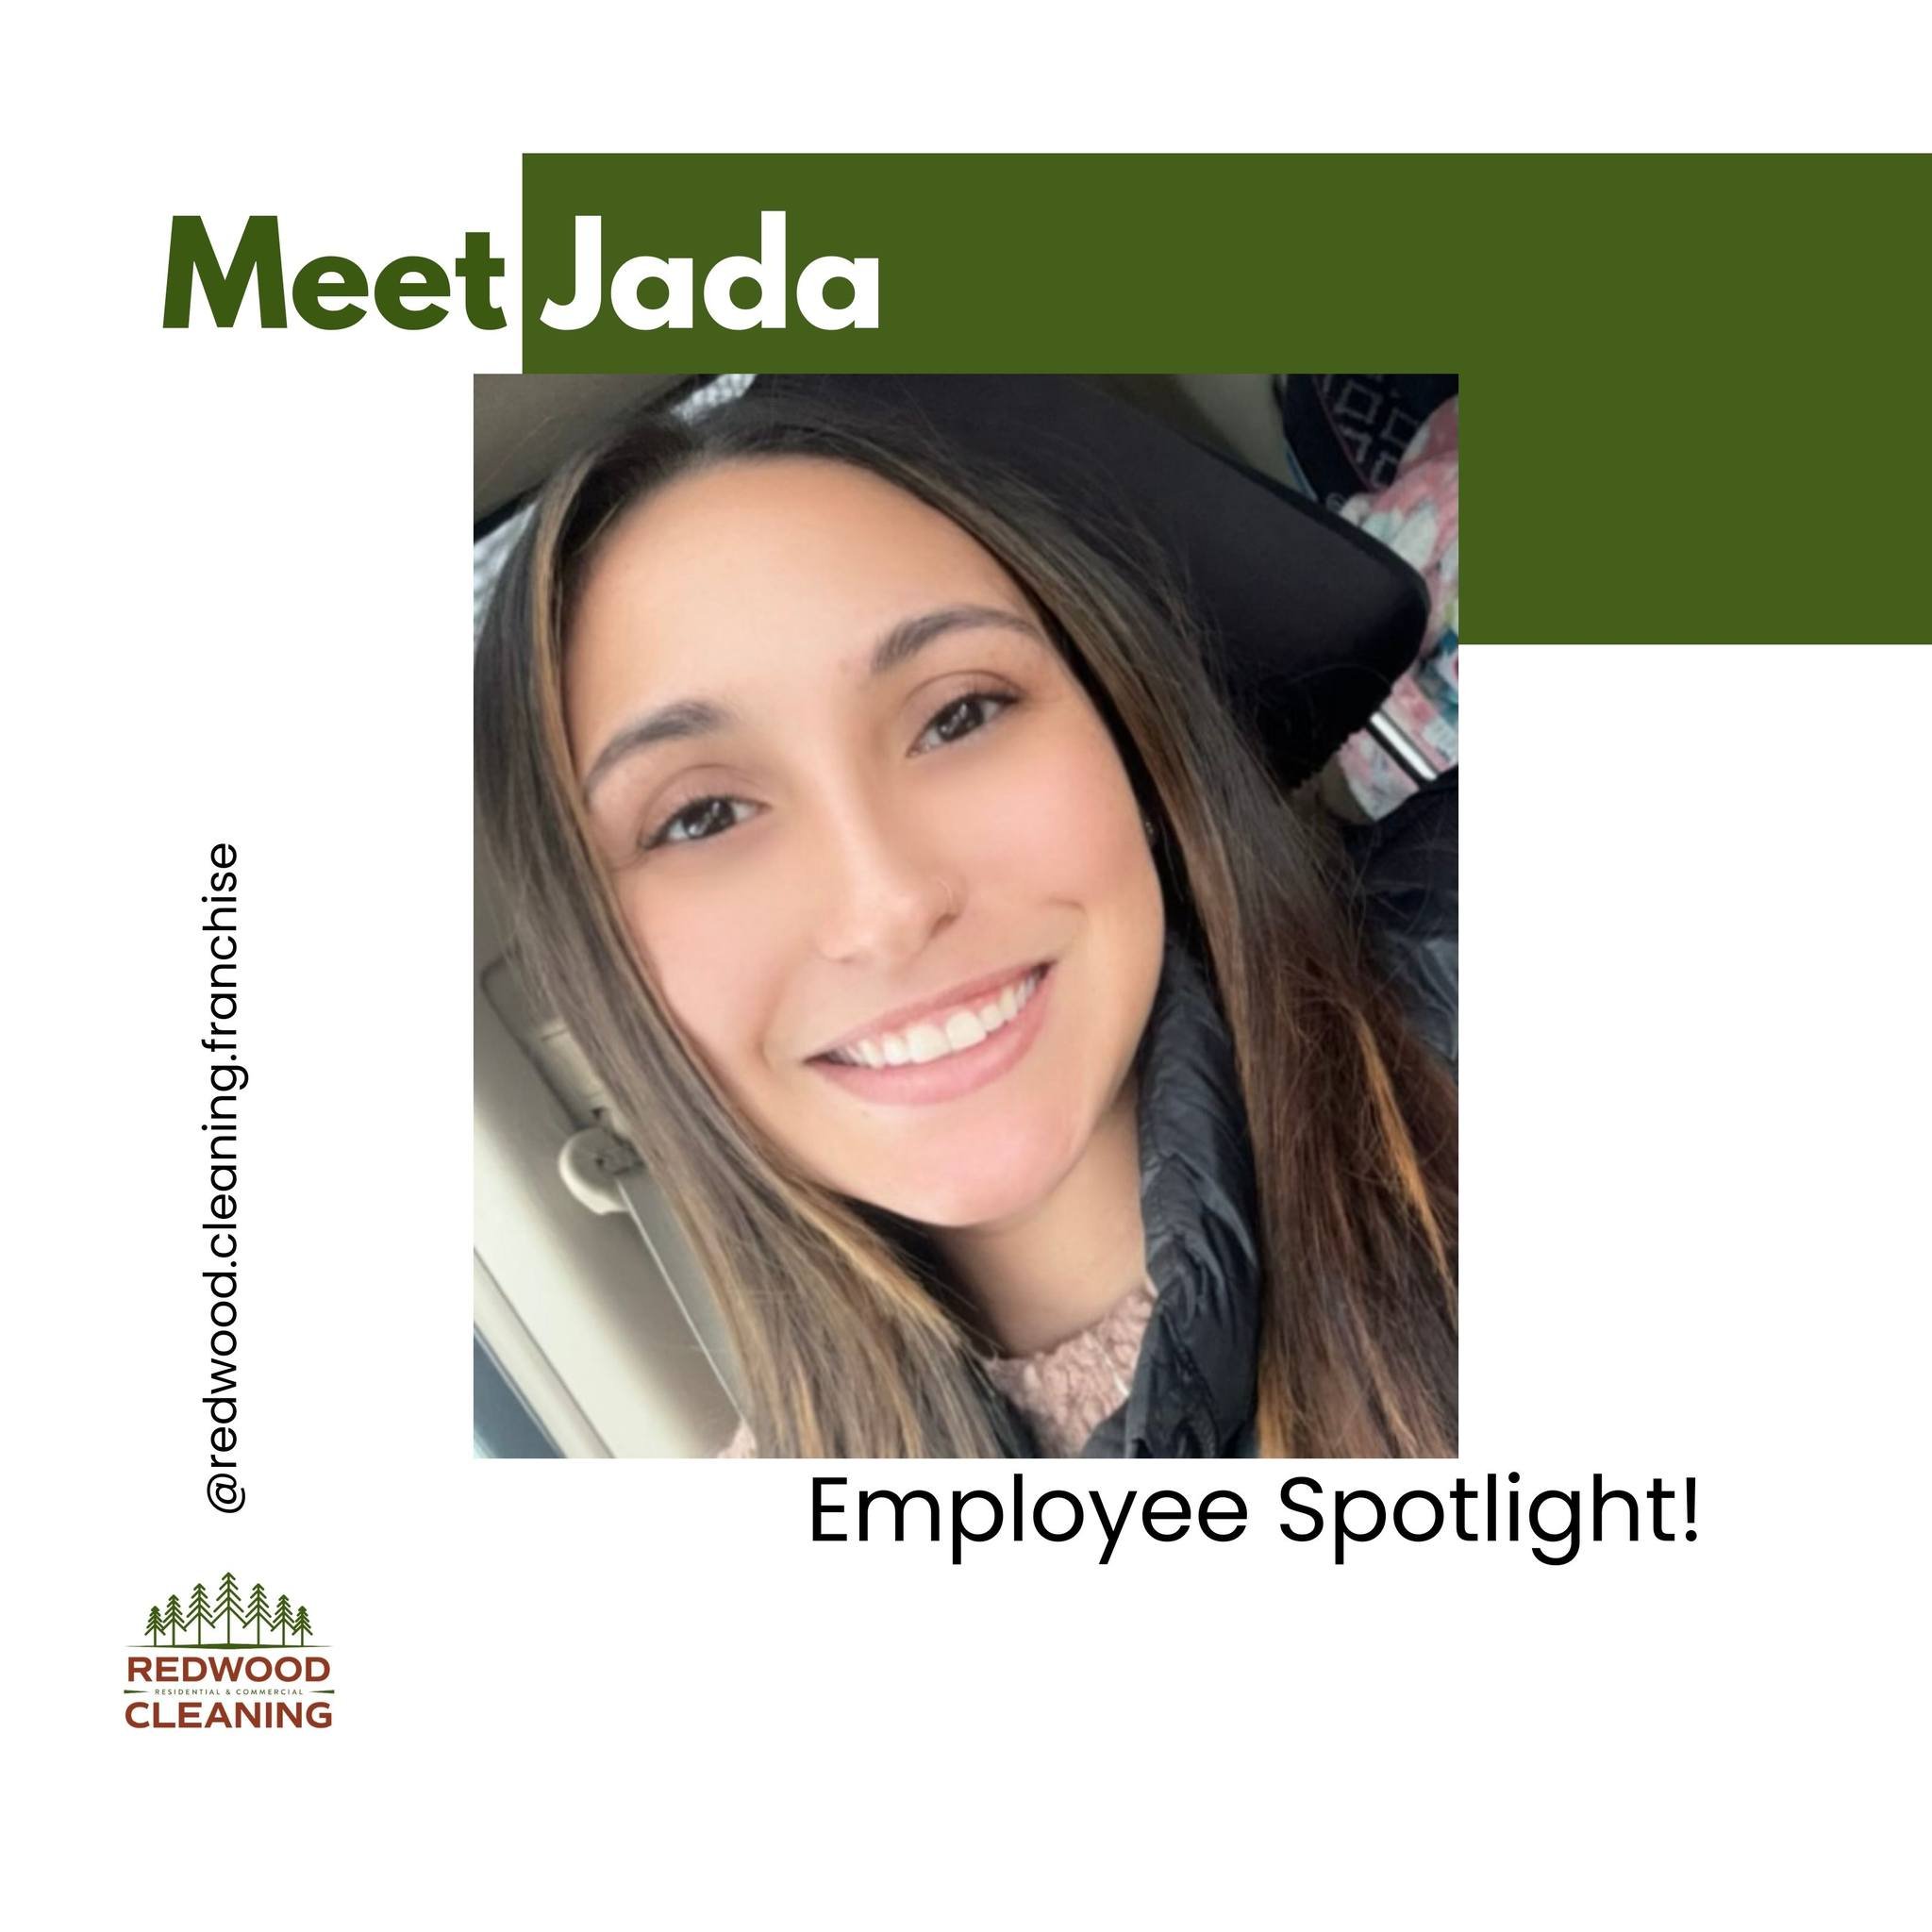 🌟 Employee Spotlight: Jada has been with the company for 10 months and currently serves as our small business shift lead. She is a hardworking mom who is always willing to take on more for the team. Jada works diligently to improve both herself and 